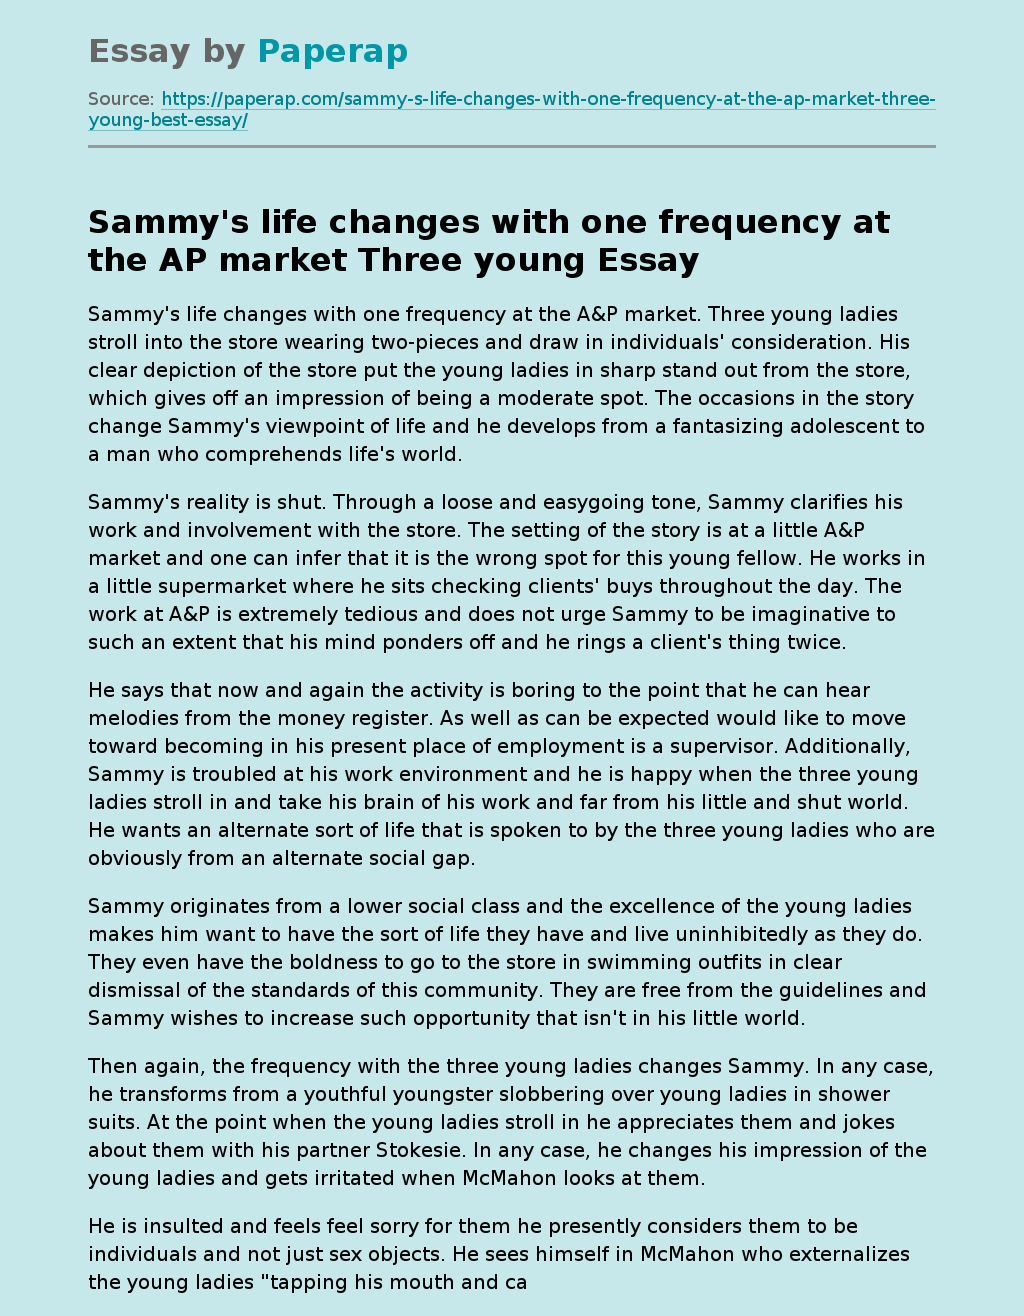 Sammy’s Life Changes With One Frequency at the AP Market